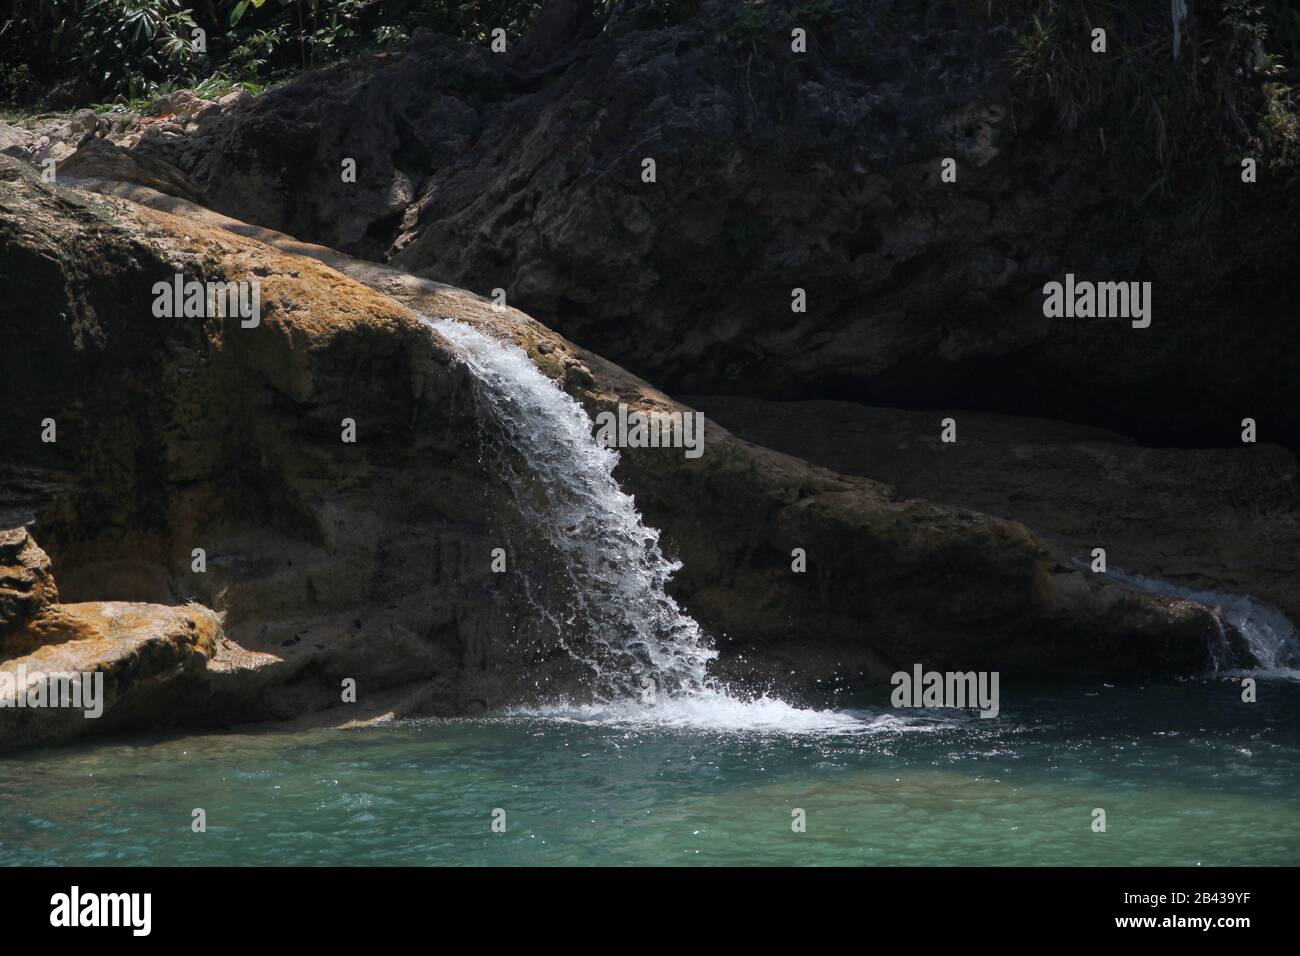 Crystal clear water cascades down Baobao Falls, one of the attractions in Liangga, Surigao del Sur, Philippines. Stock Photo